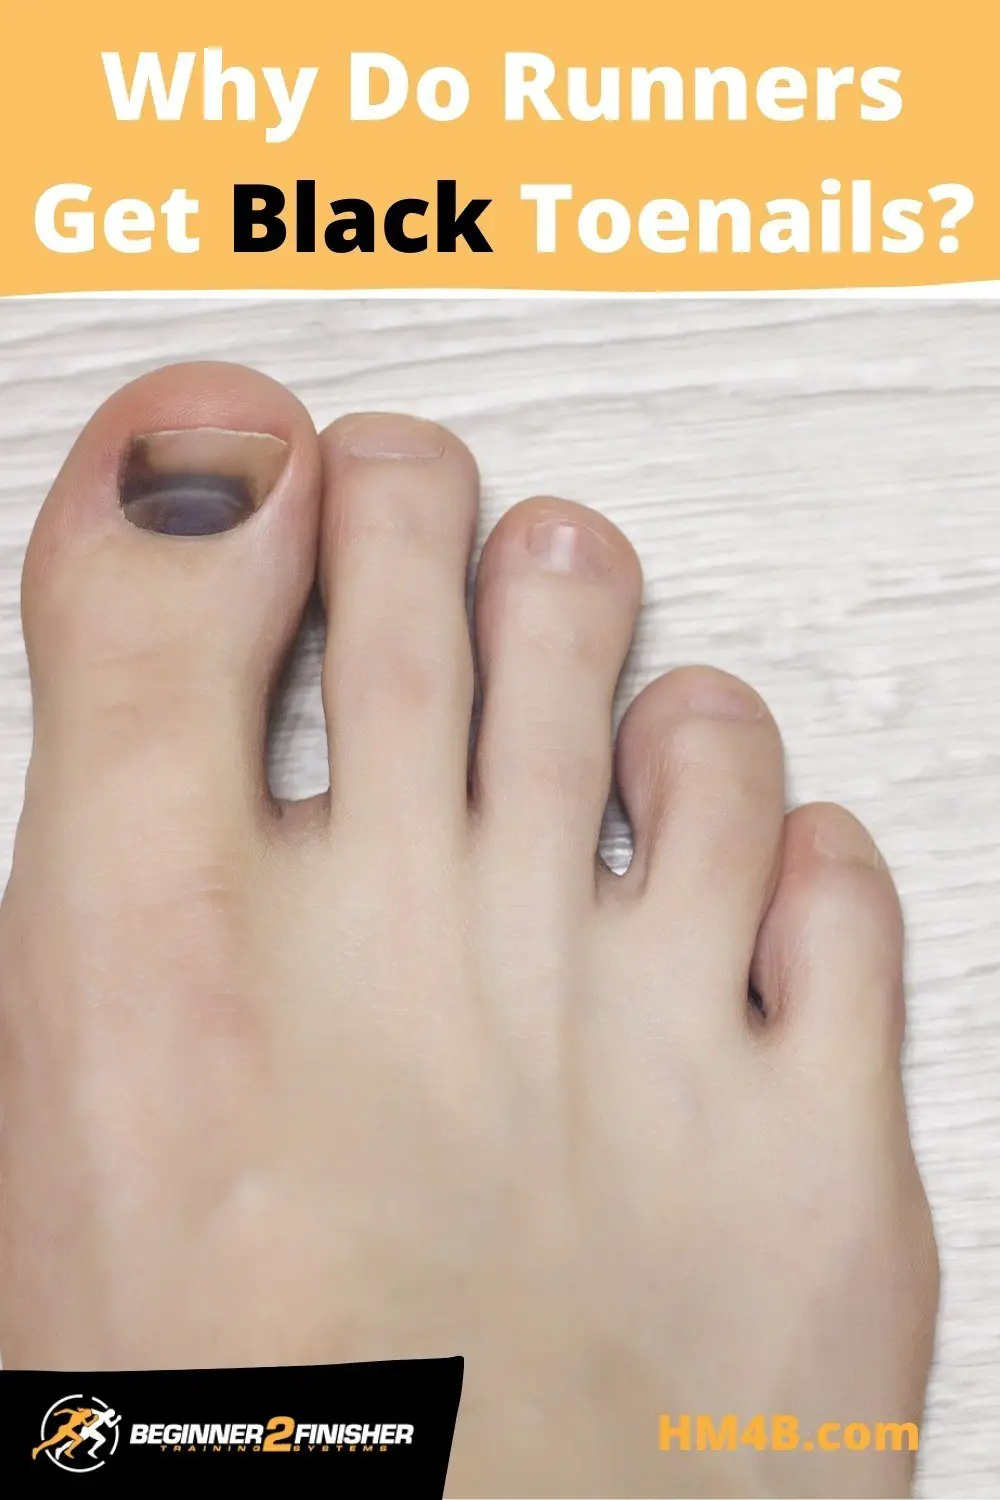 Why Do Runners Get Black Toenails? Cause, Injury, & Prevention.